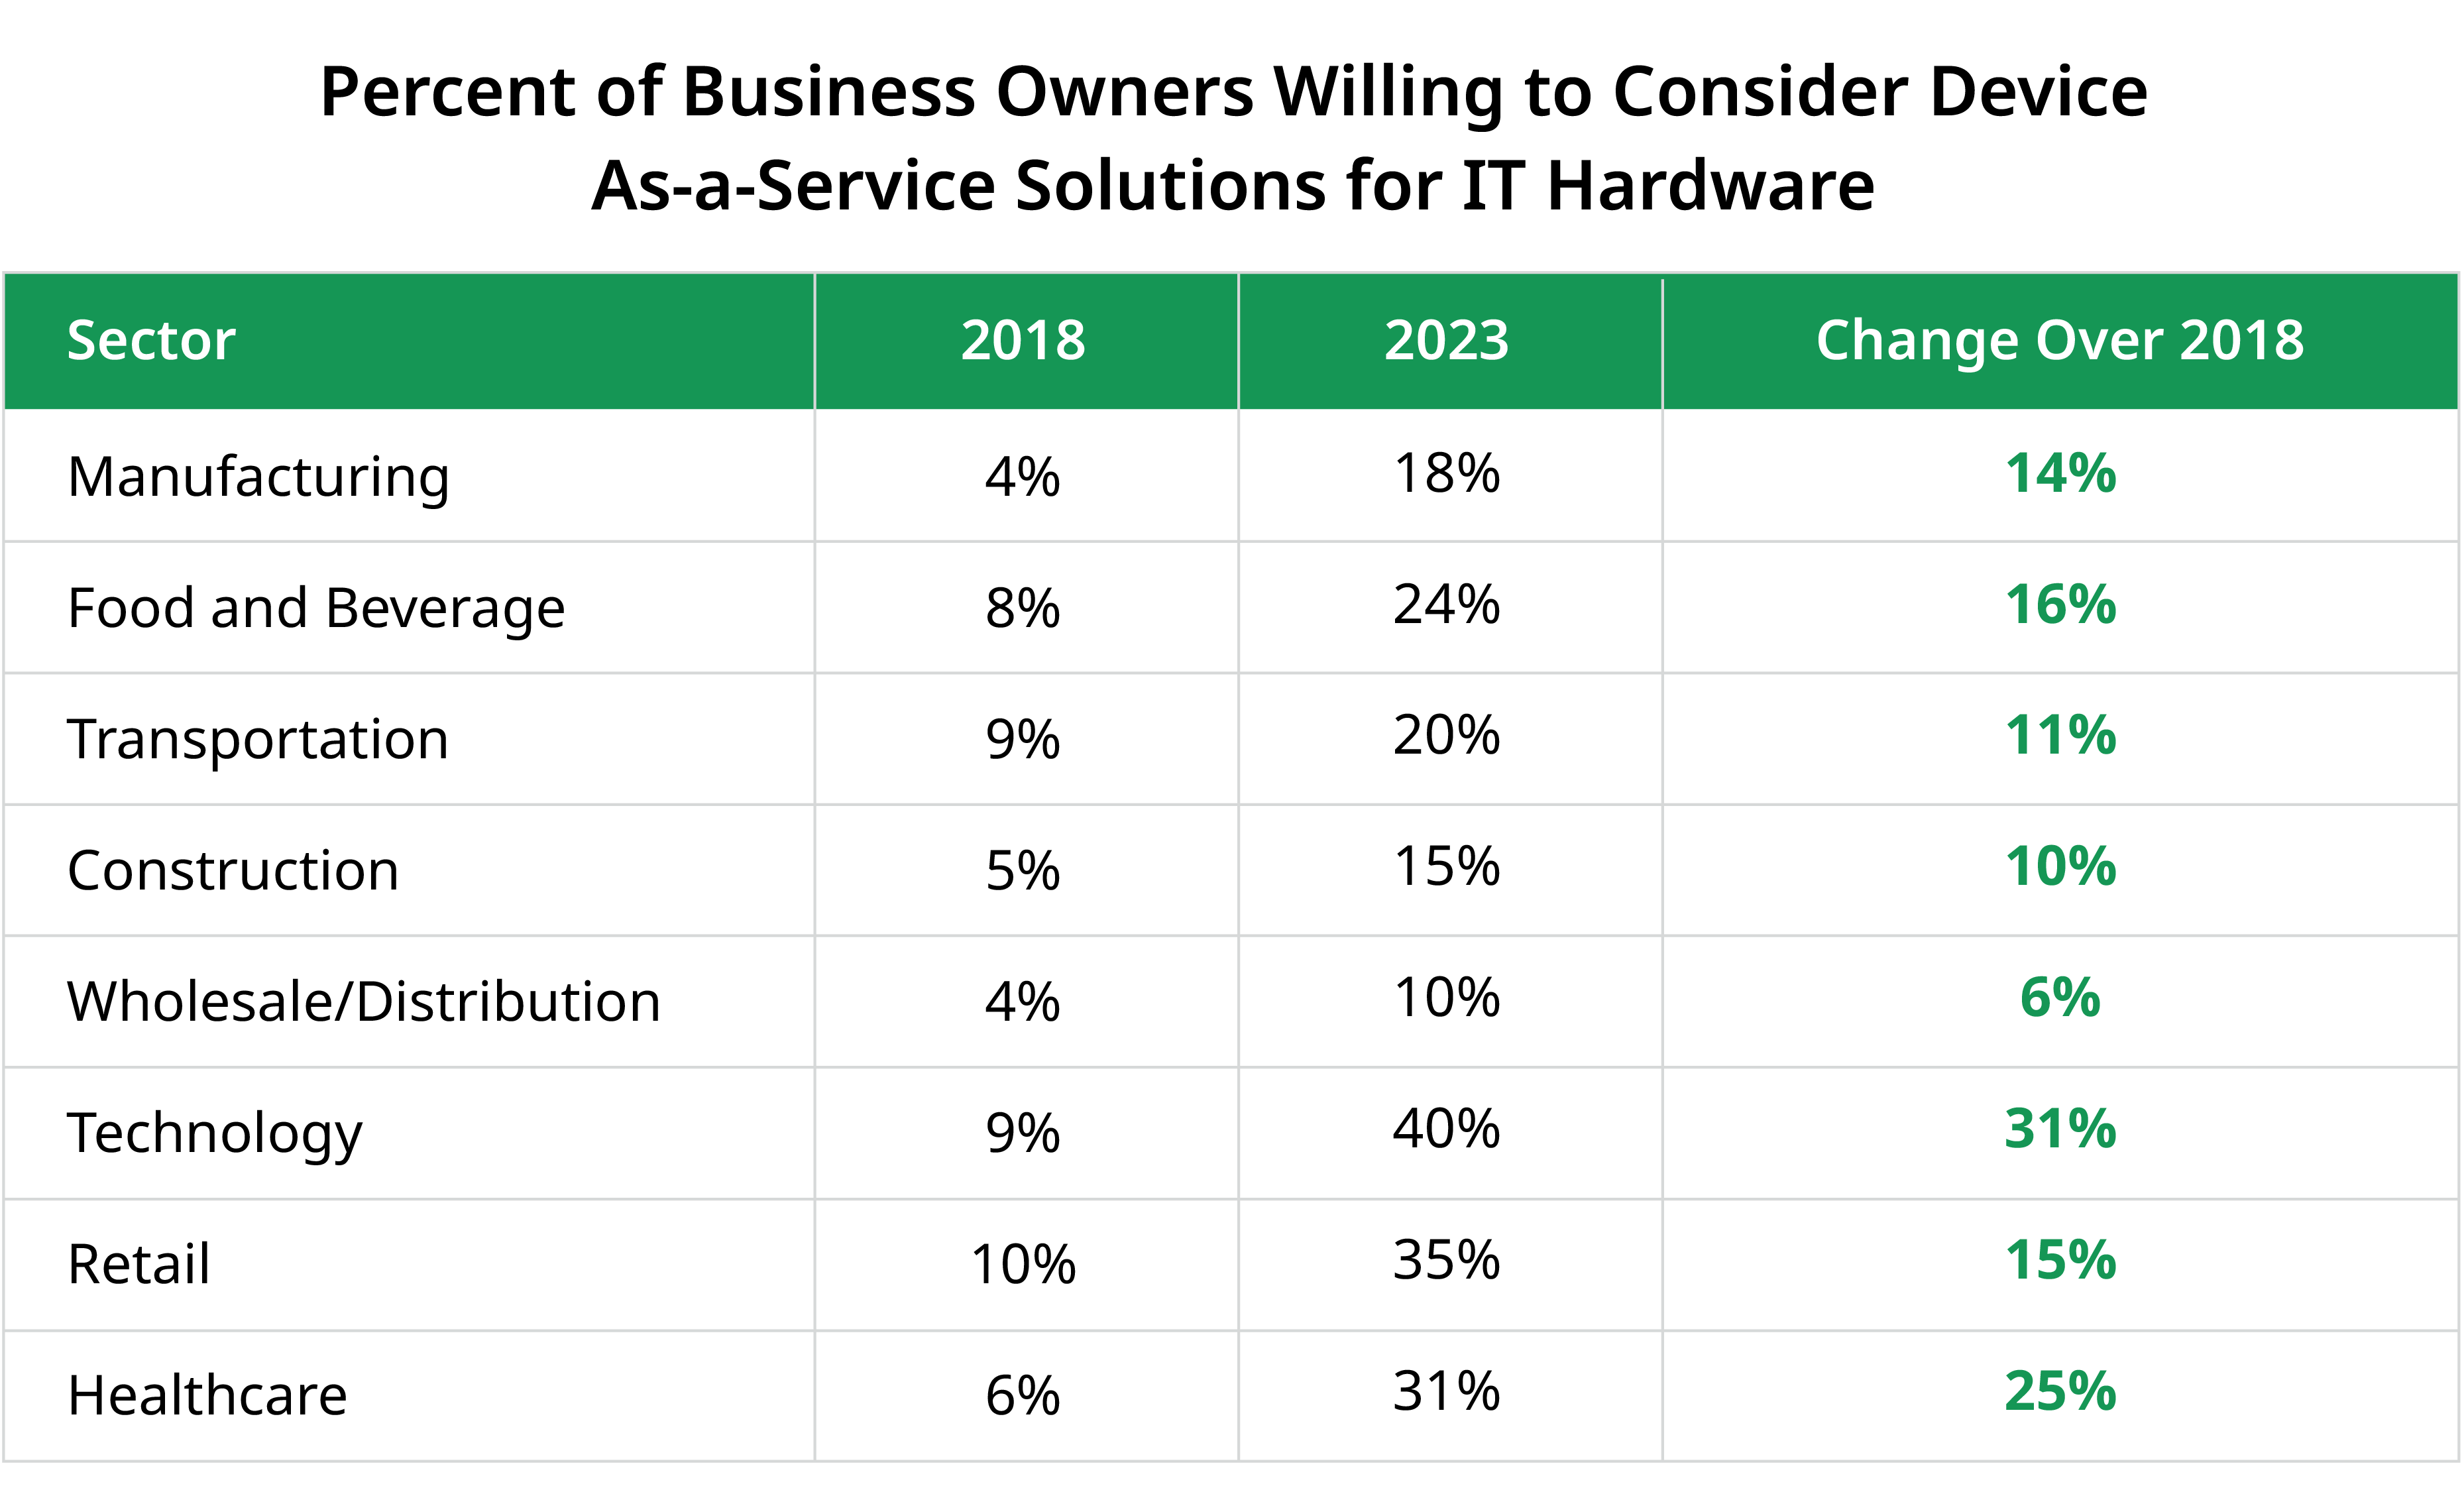 Percent of business owners willing to consider device as-a-service solutions for IT hardware